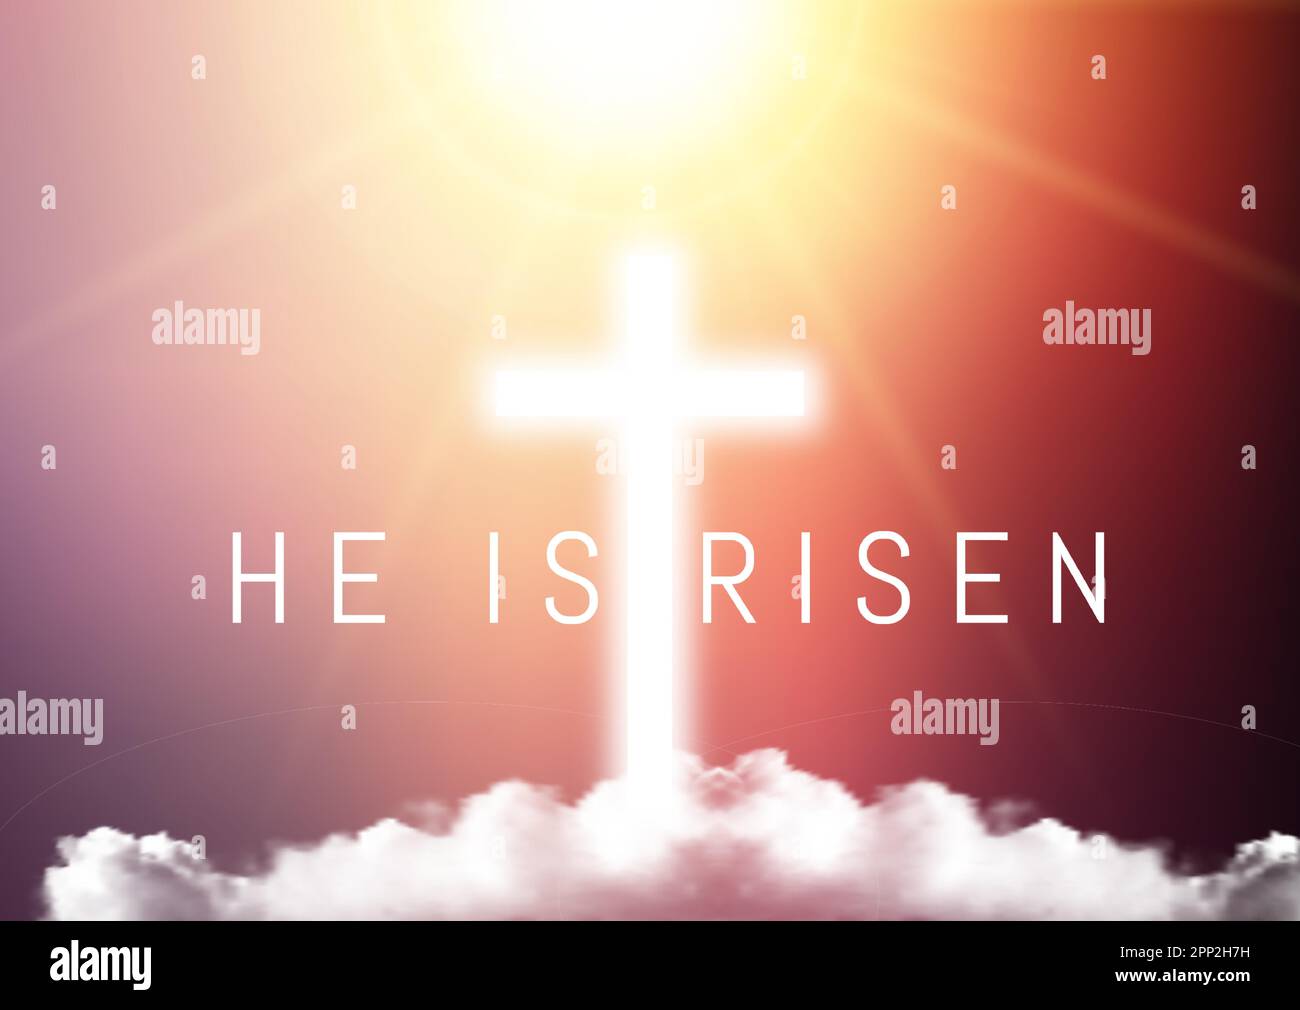 Background for Good Friday with cross and he is risen wording Stock Vector